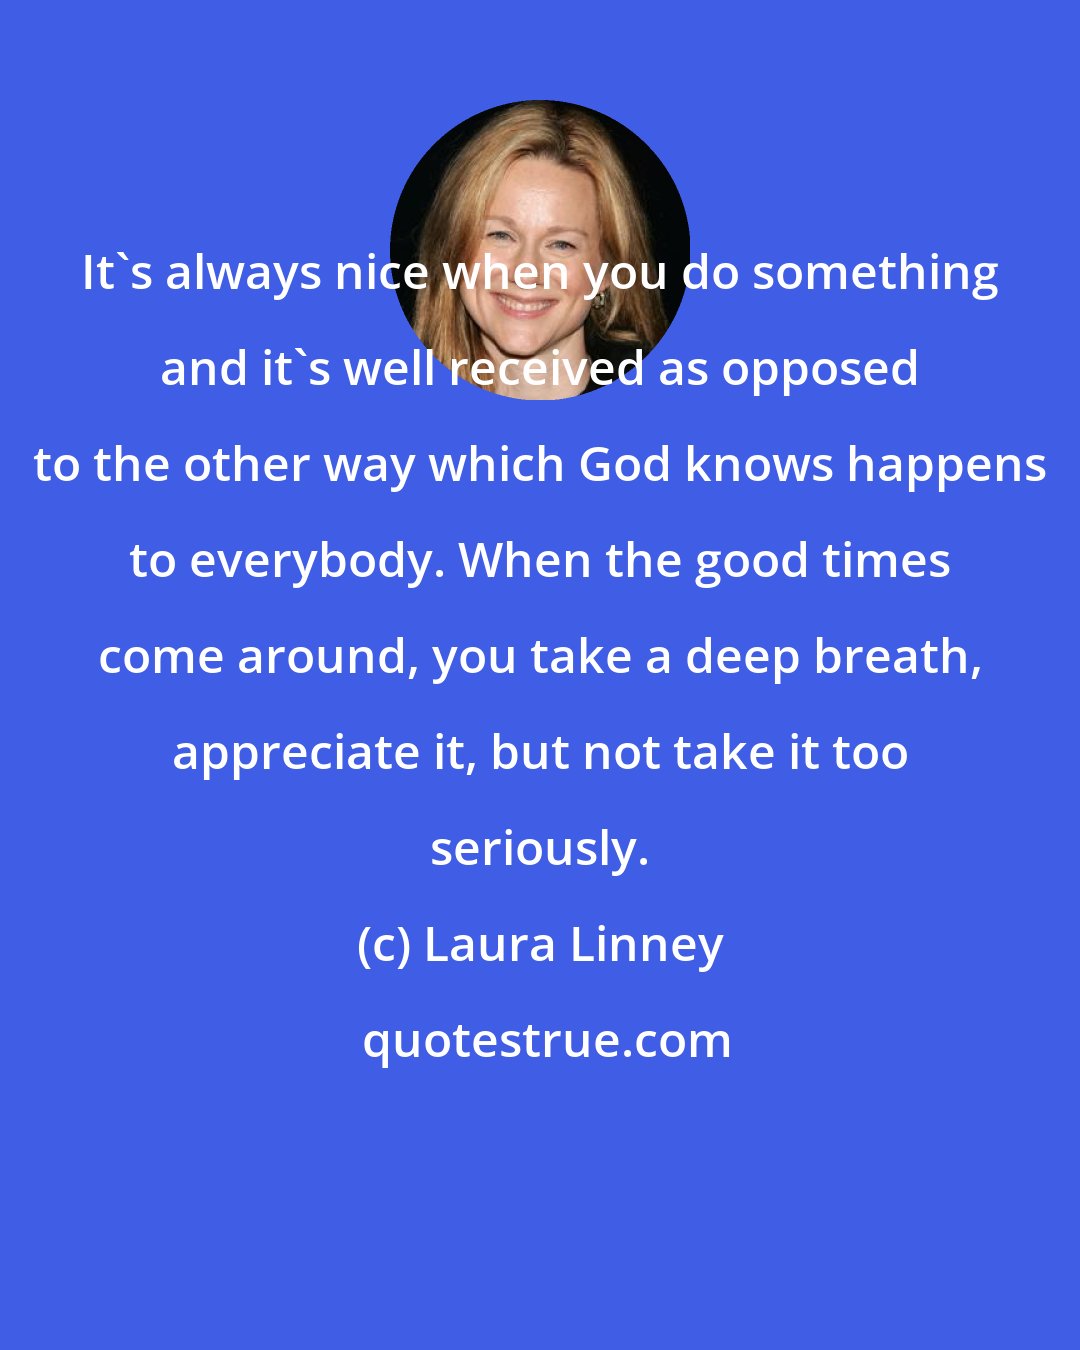 Laura Linney: It's always nice when you do something and it's well received as opposed to the other way which God knows happens to everybody. When the good times come around, you take a deep breath, appreciate it, but not take it too seriously.